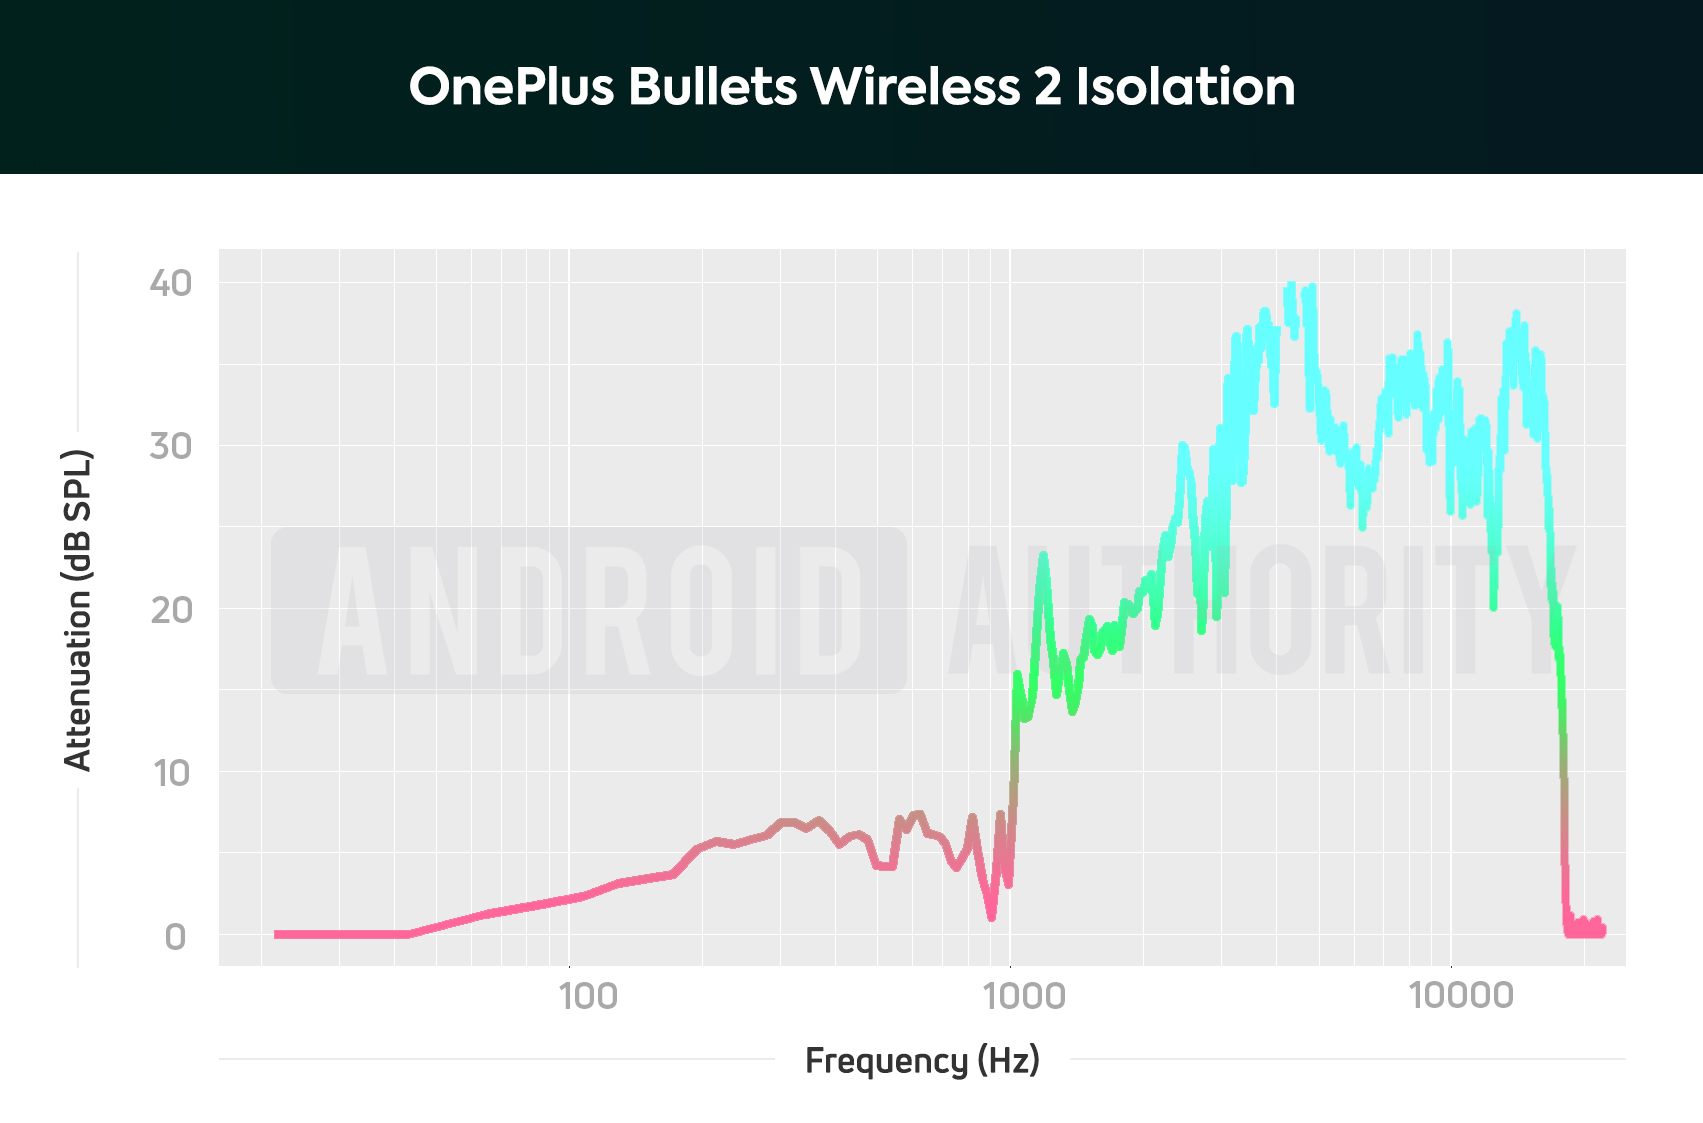 OnePlus Bullets Wireless 2 isolation performance chart.